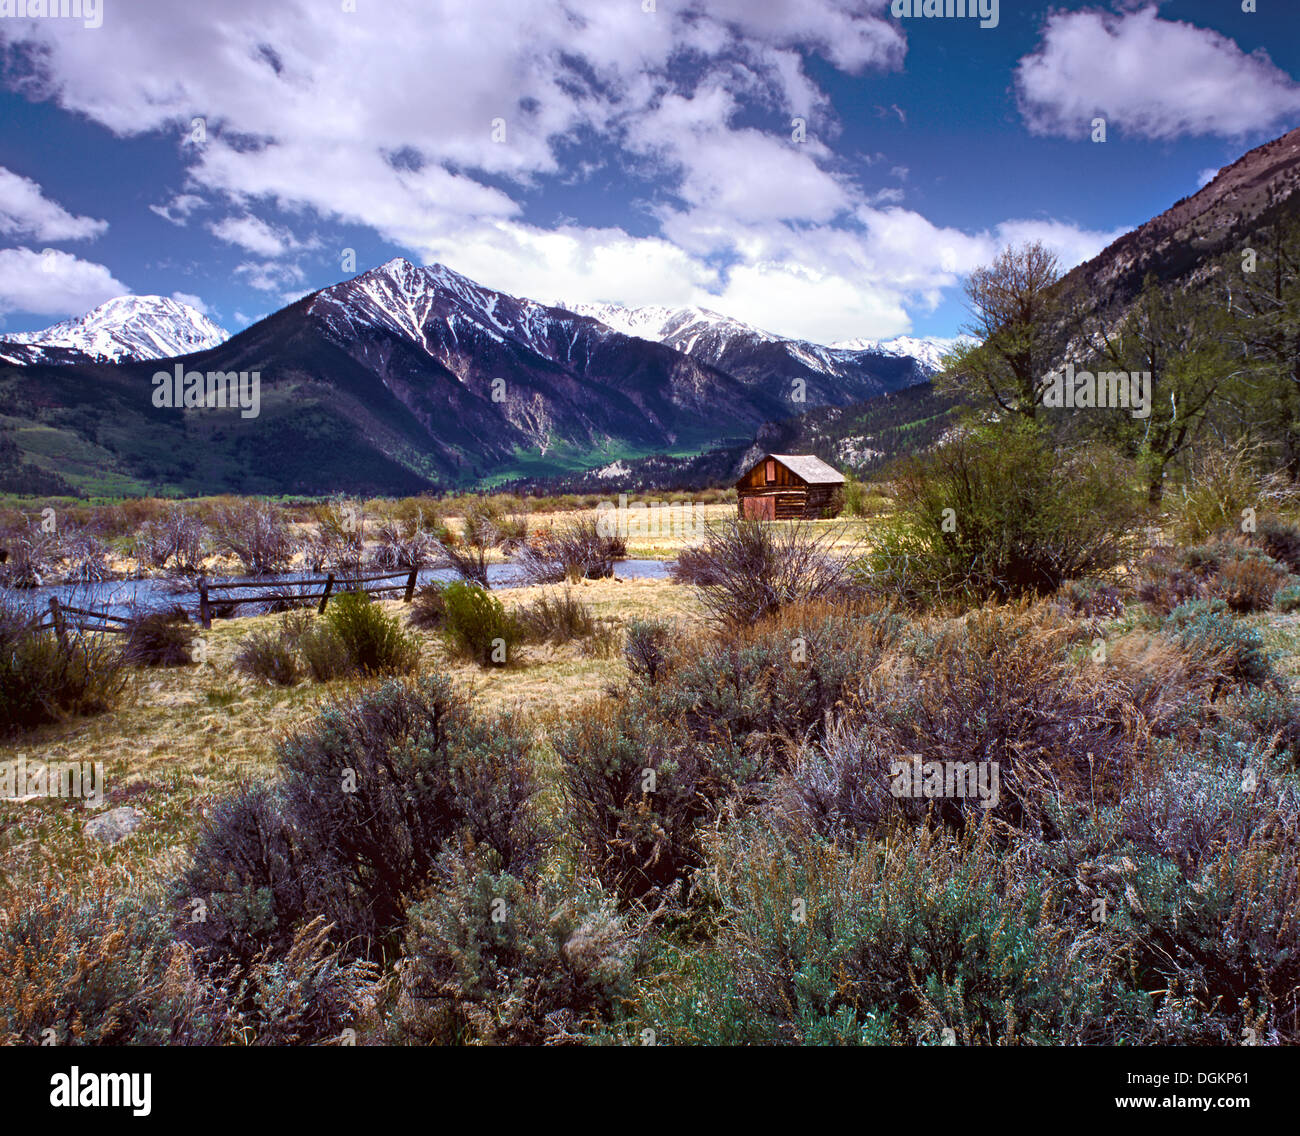 A view of the wilderness near Twin Lakes in Colorado. Stock Photo